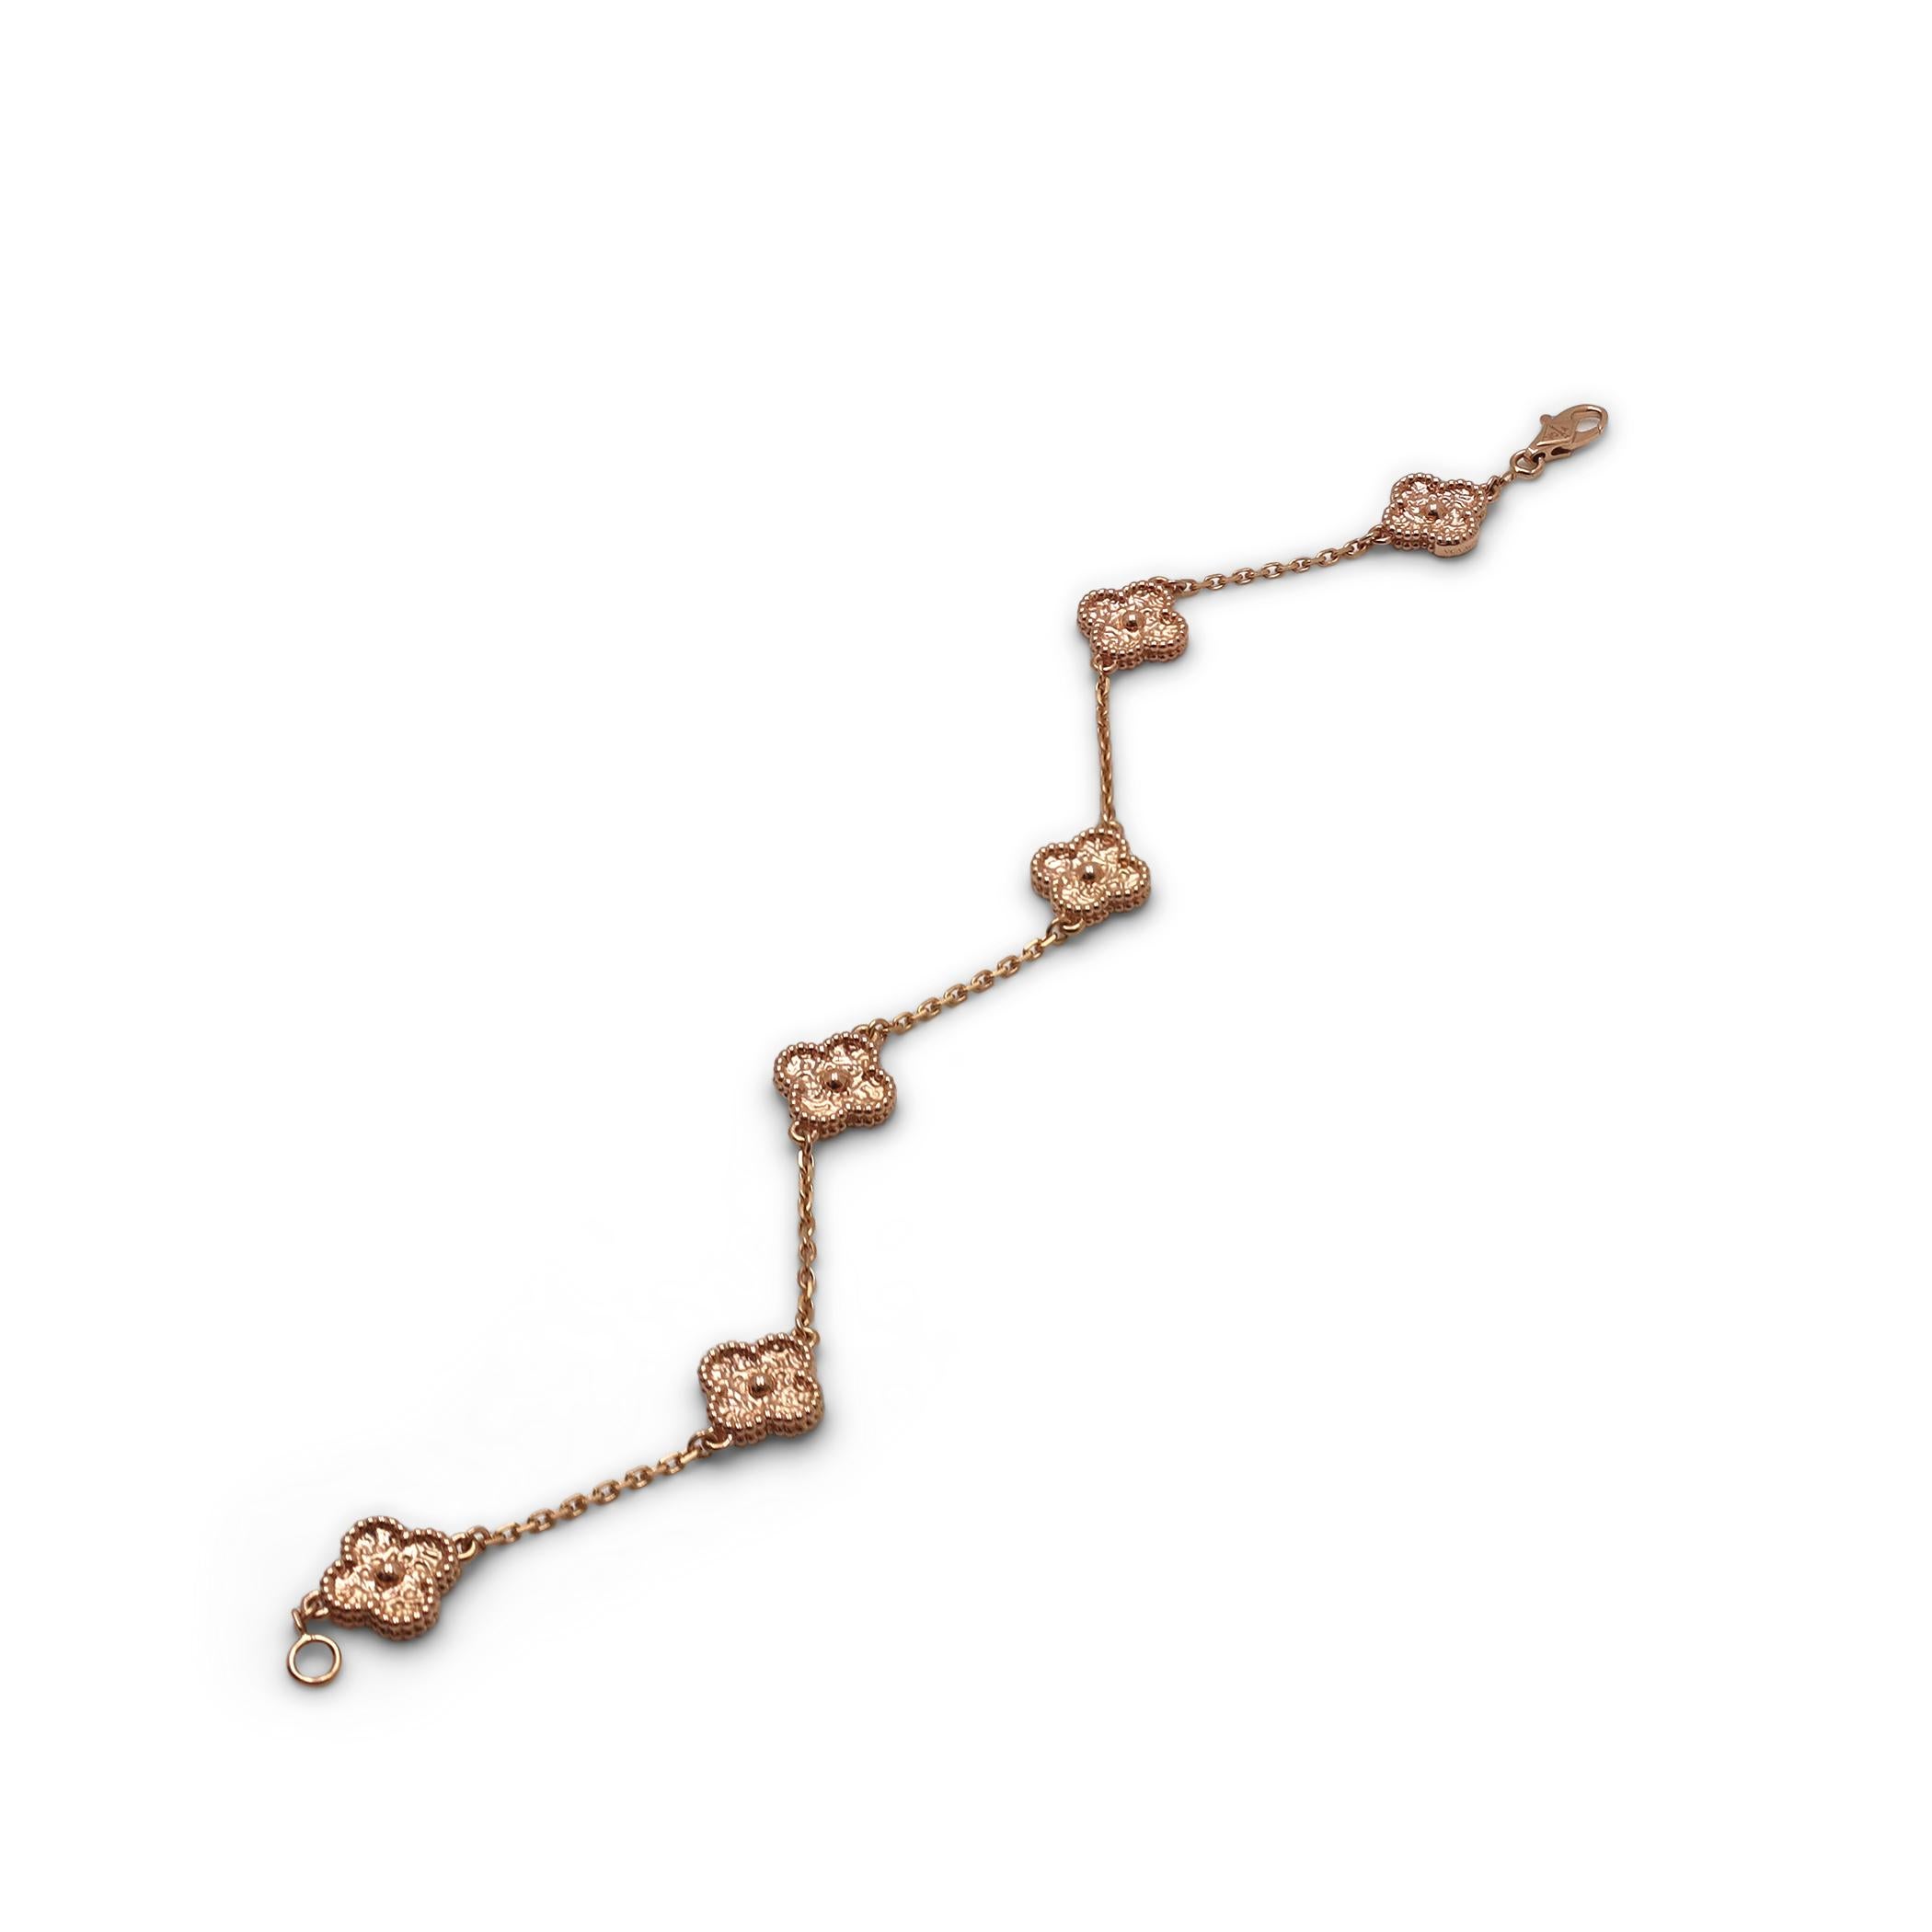 Authentic Van Cleef & Arpels 'Sweet Alhambra bracelet. Featuring 6 motifs crafted in textured 18 karat rose gold. The bracelet measures 7 inches in length. Signed VCA, Au750, with serial number. Bracelet is presented with the original VCA papers, no